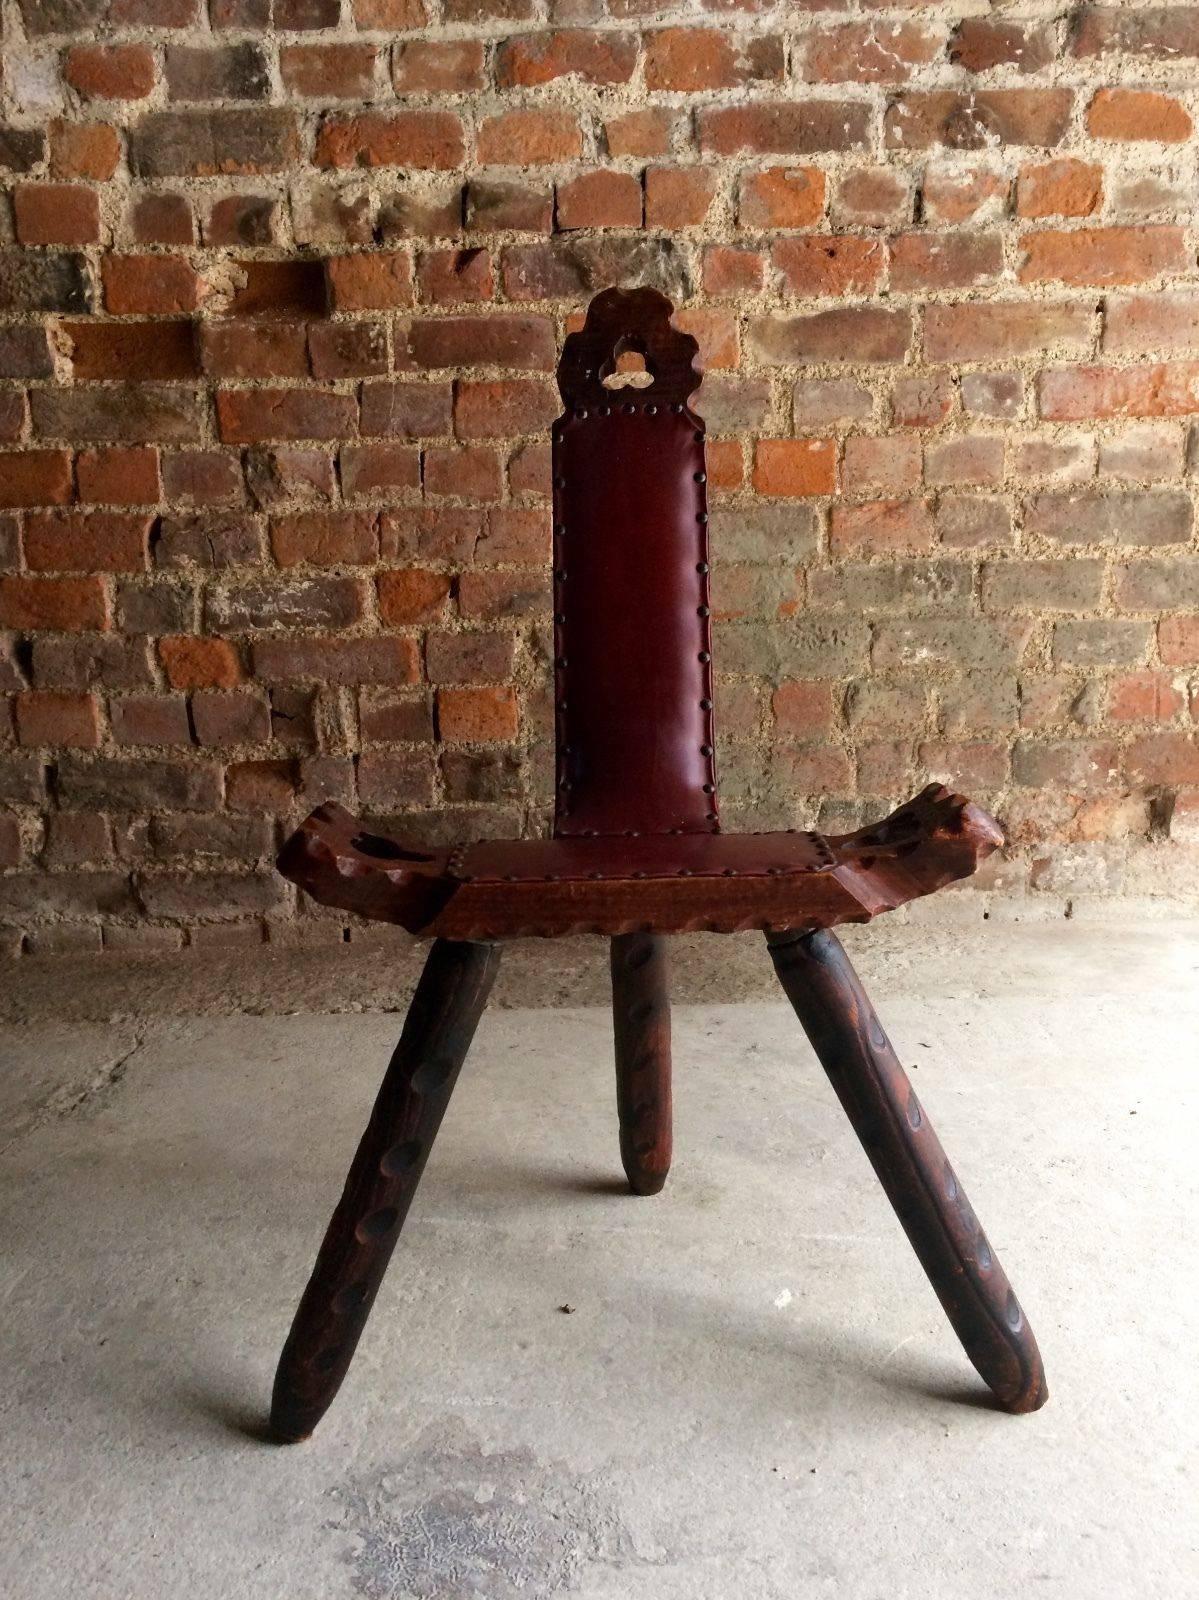 A Stunning small late 19th century three legged gypsy manor stool, having noggin legs, carved back with studded leatherette finish, looks amazing.